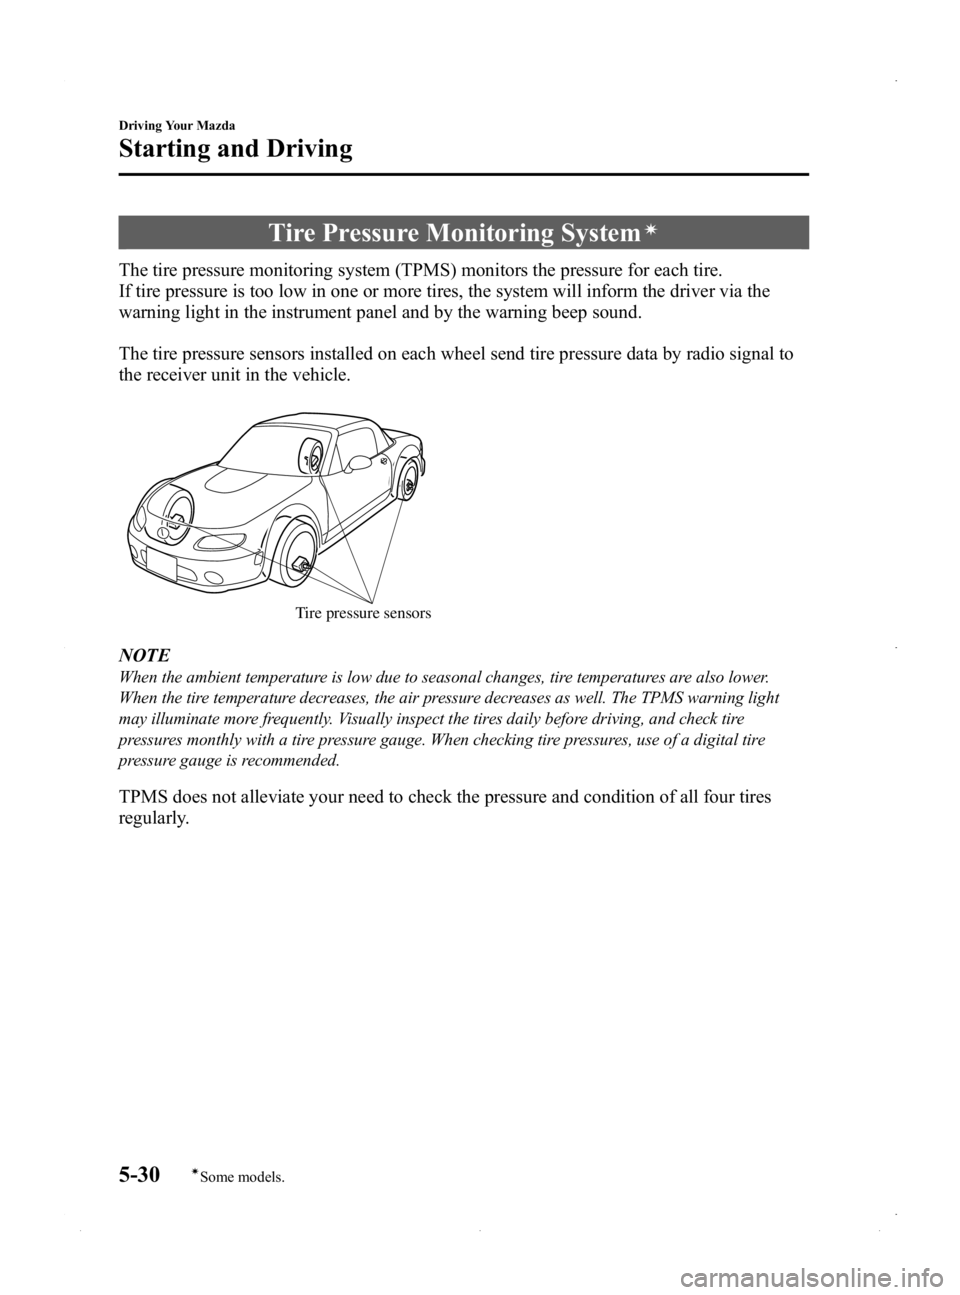 MAZDA MODEL MX-5 MIATA PRHT 2015  Owners Manual Black plate (174,1)
Tire Pressure Monitoring Systemí
The tire pressure monitoring system (TPMS) monitors the pressure for each tire.
If tire pressure is too low in one or more tires, the system will 